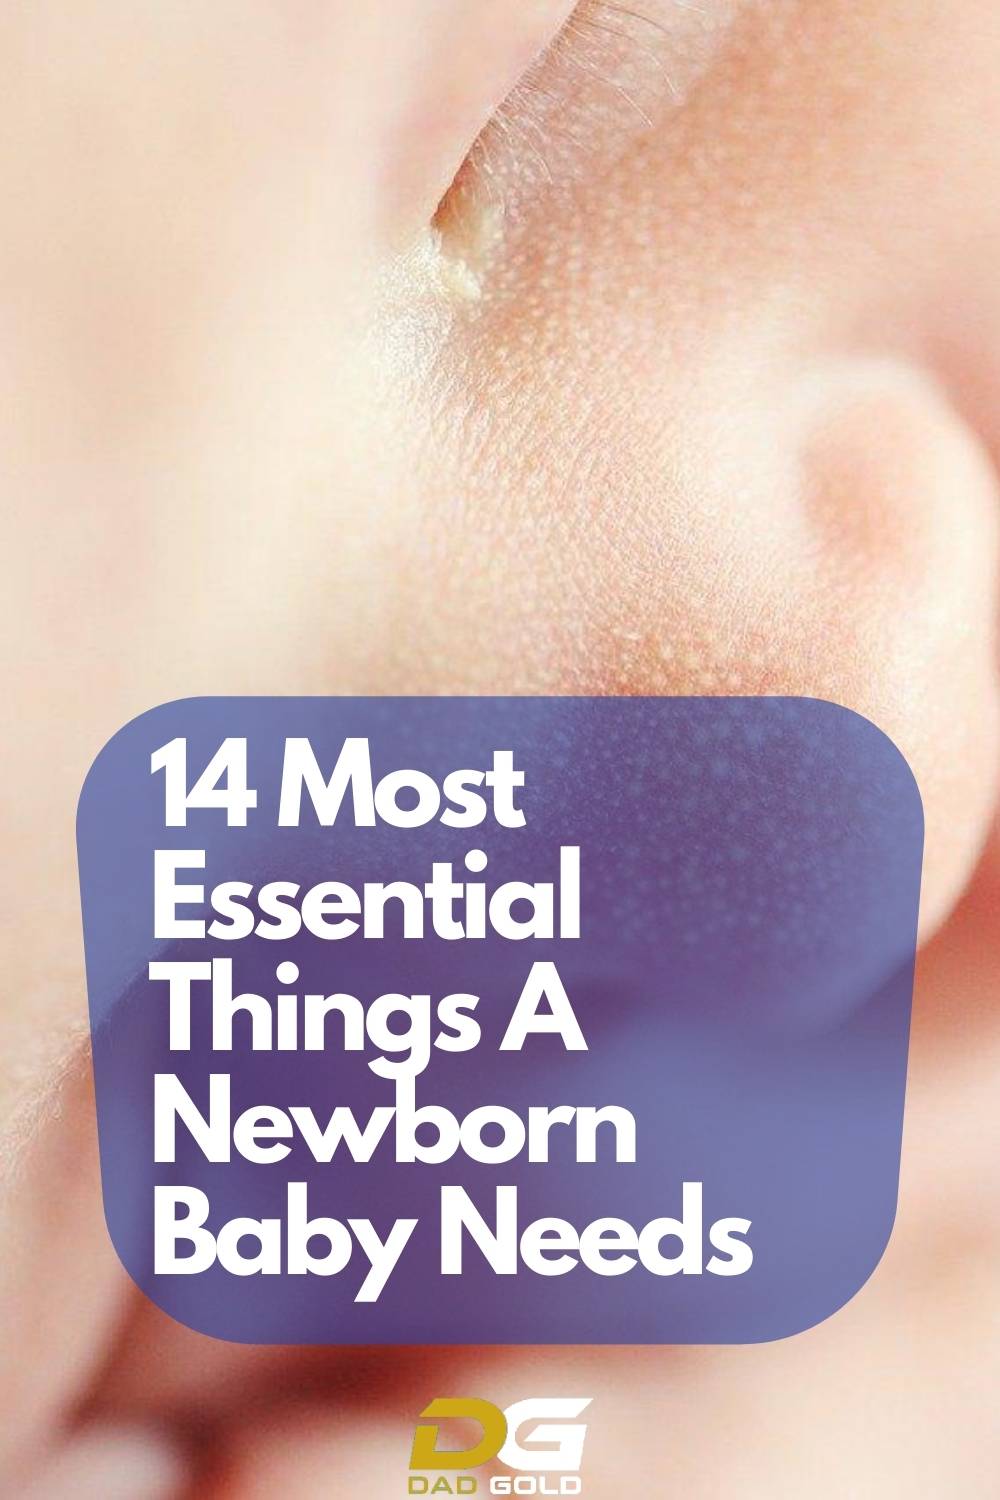 14 Most Essential Things A Newborn Baby Needs